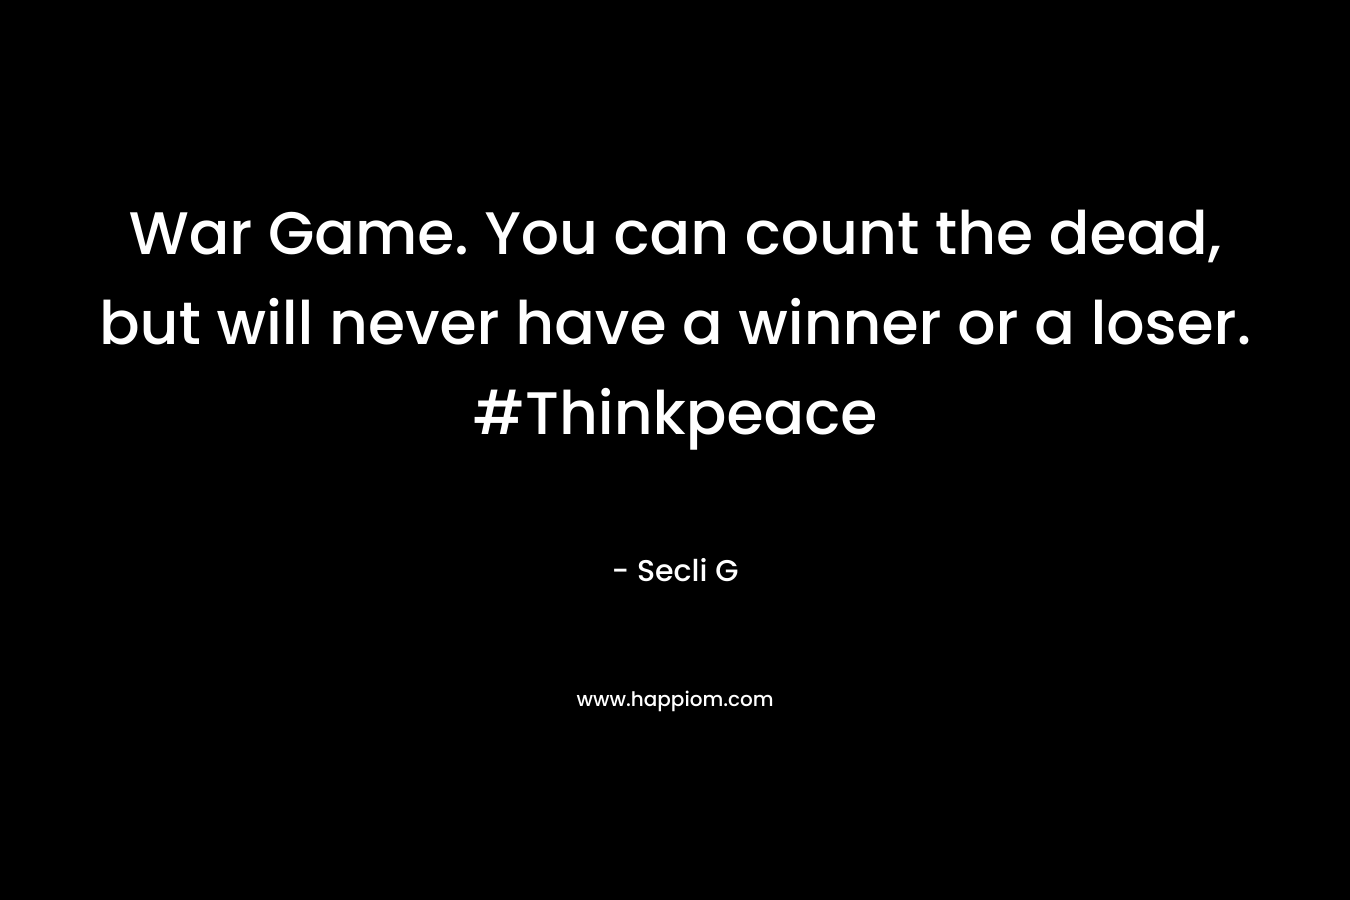 War Game. You can count the dead, but will never have a winner or a loser. #Thinkpeace – Secli G